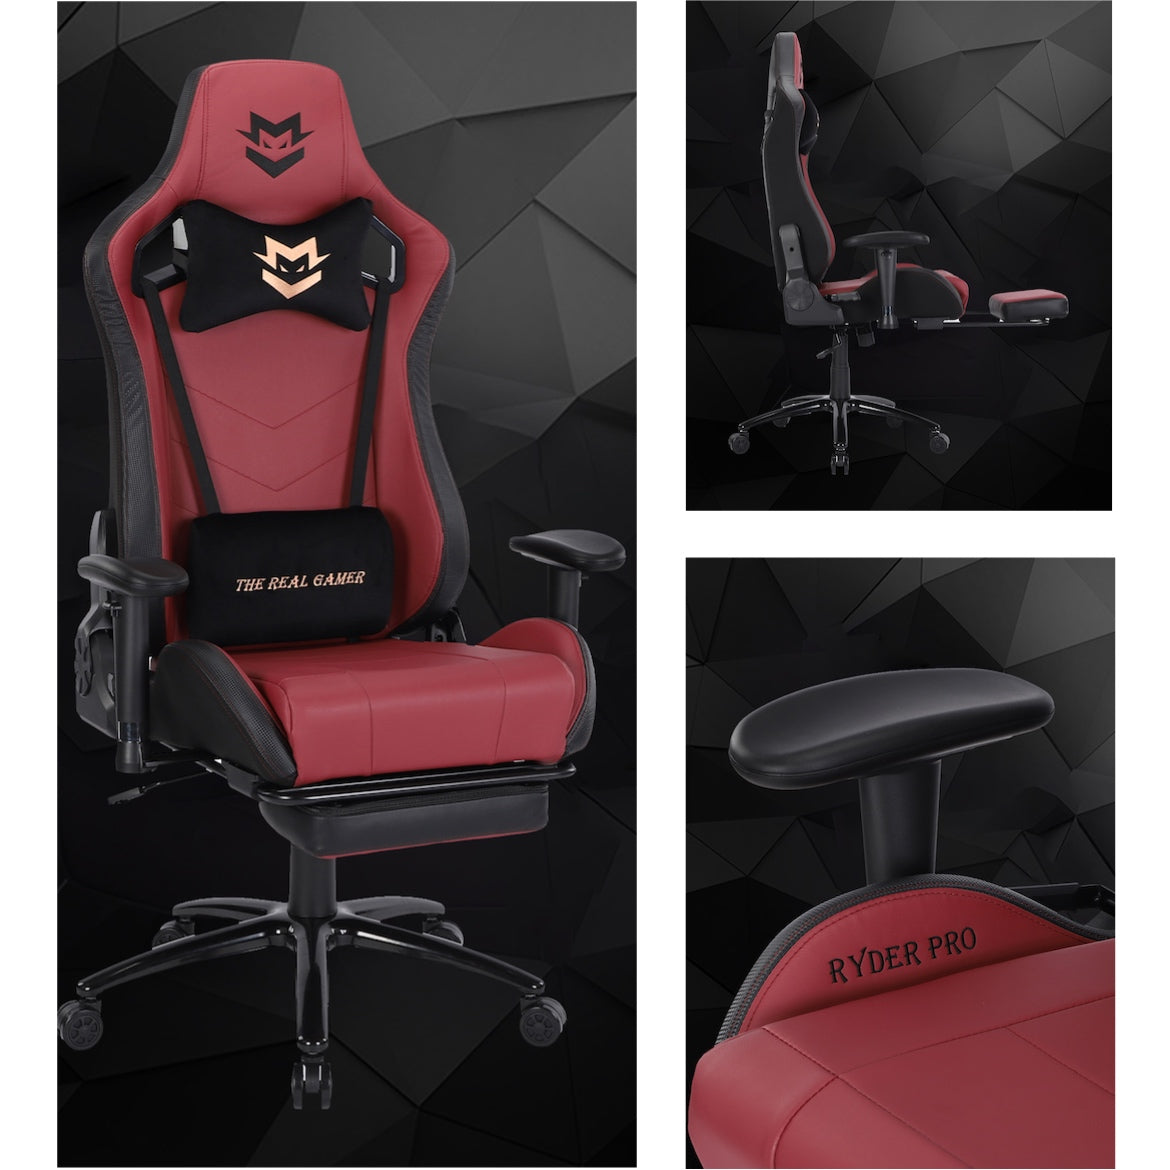 Wyatt Gaming Sofa Chair + Ryder Pro Gaming Chair - Red